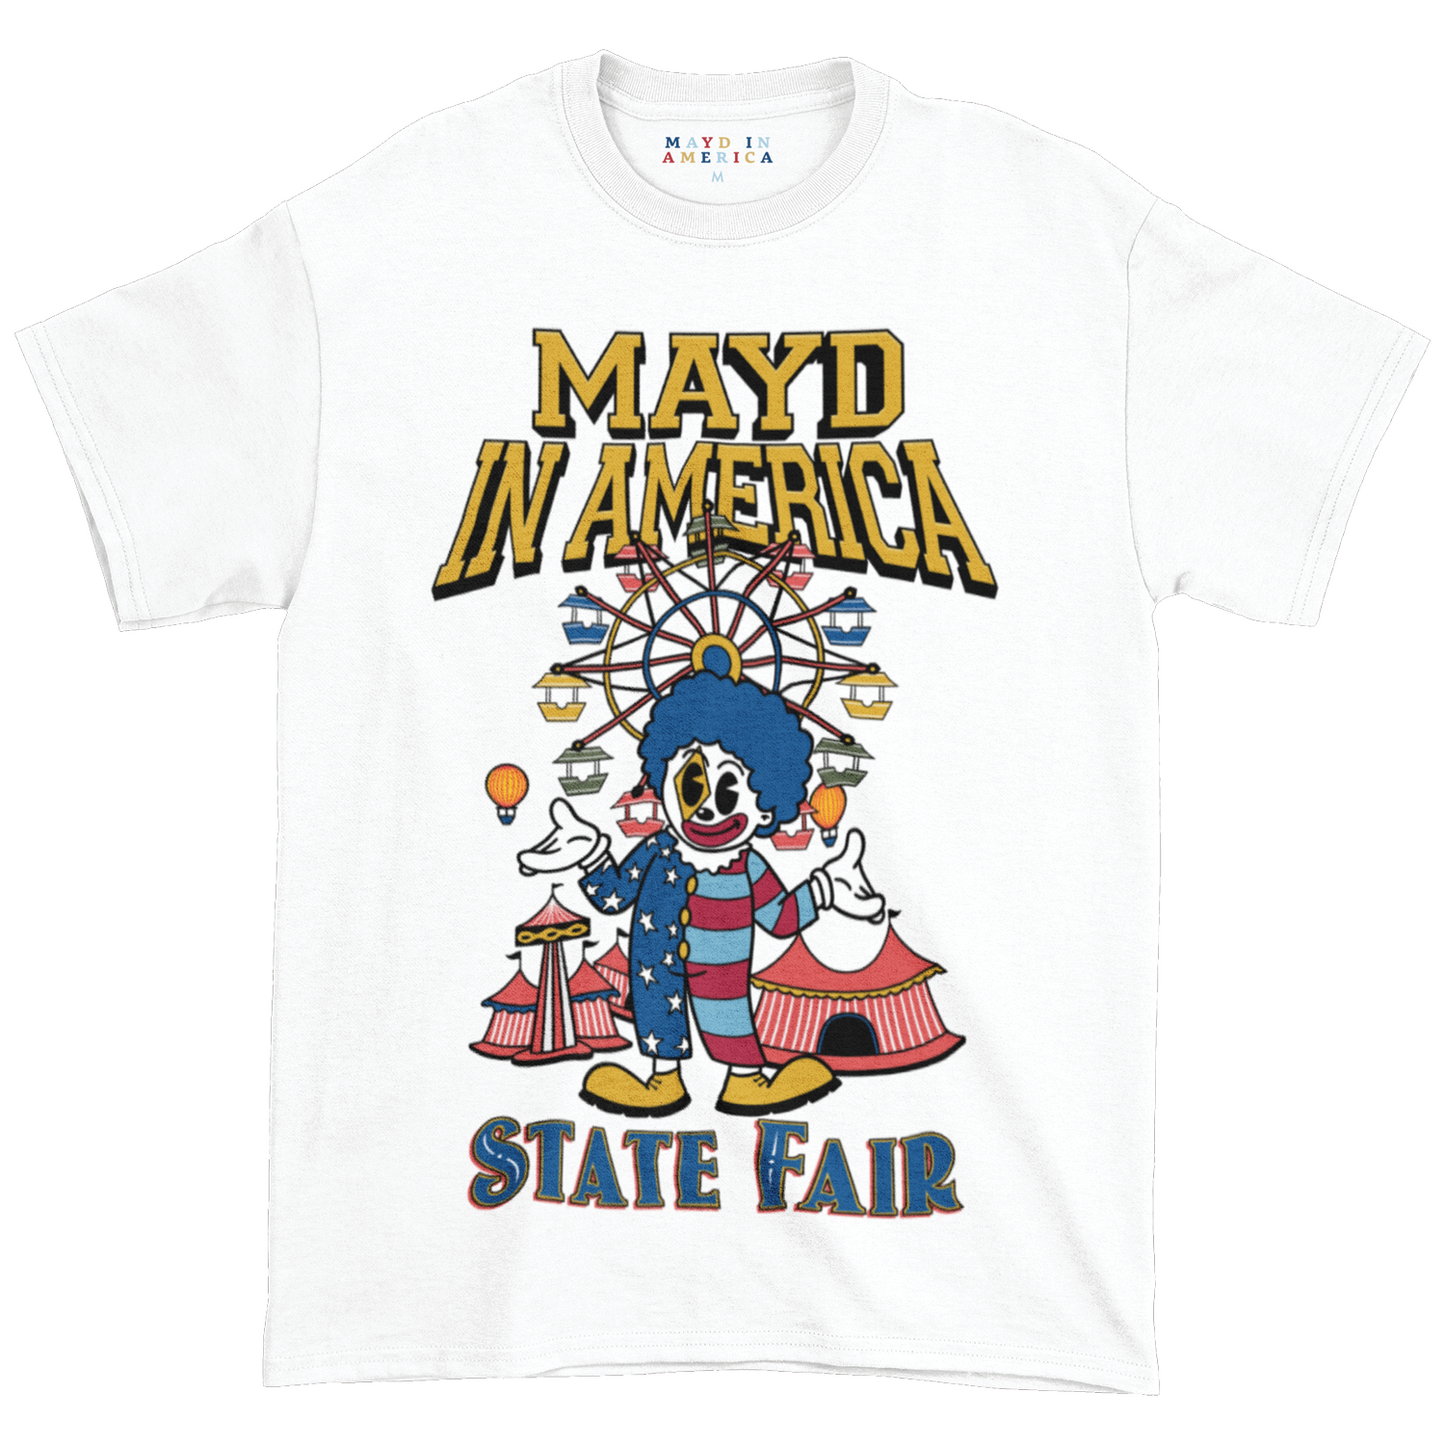 MAYD in America State Fair T-shirt